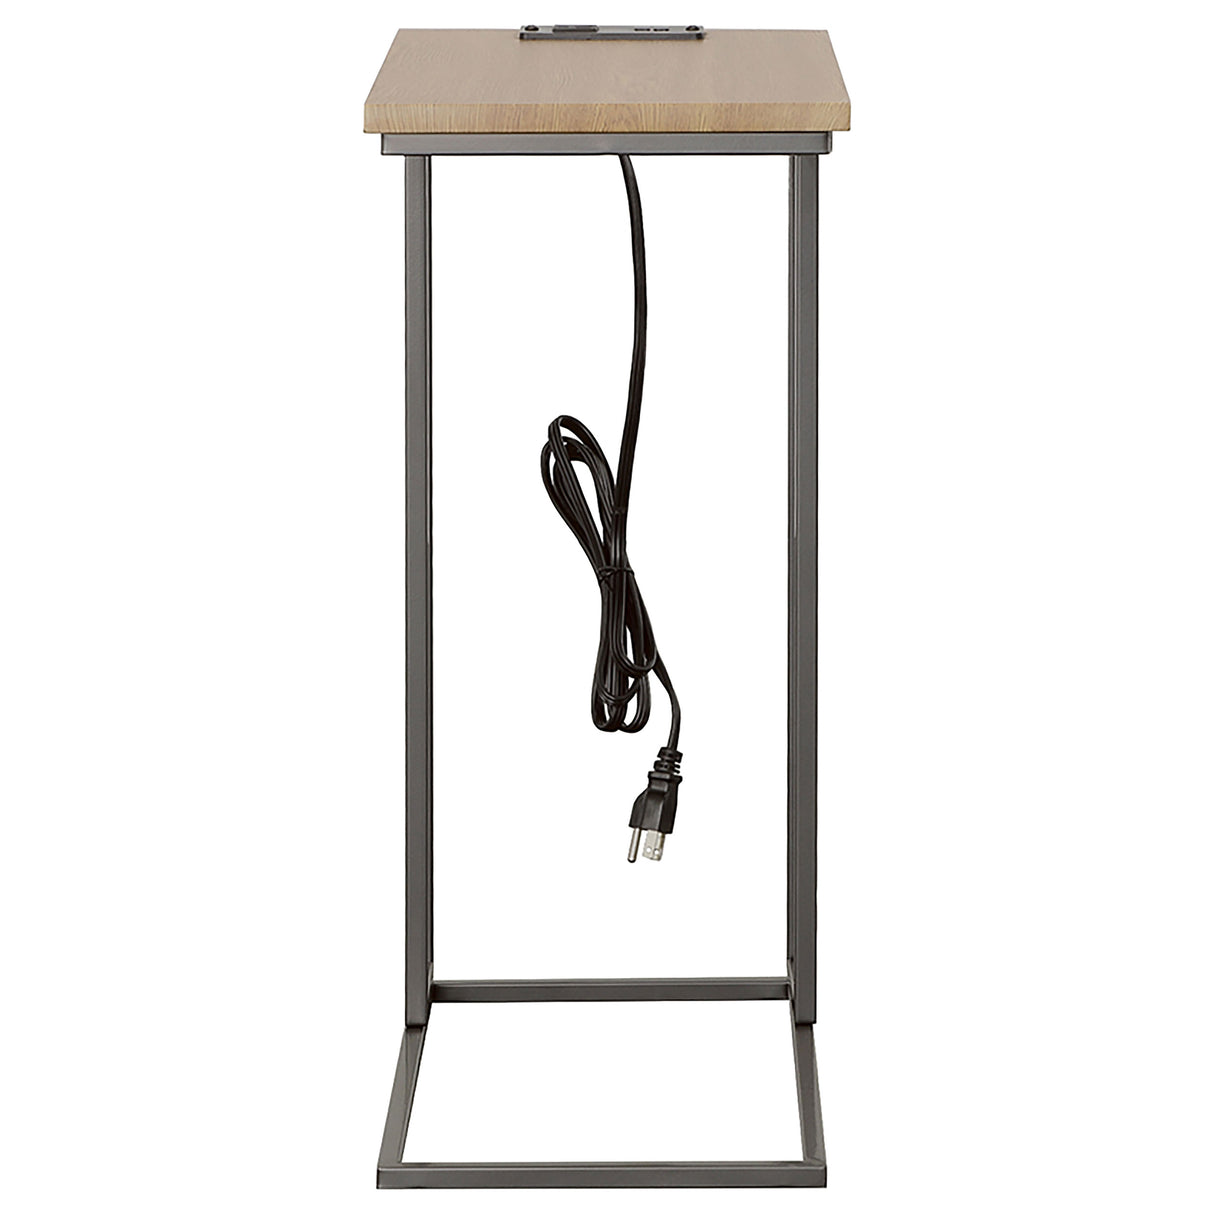 Side Table - Rudy Snack Table with Power Outlet Gunmetal and Natural